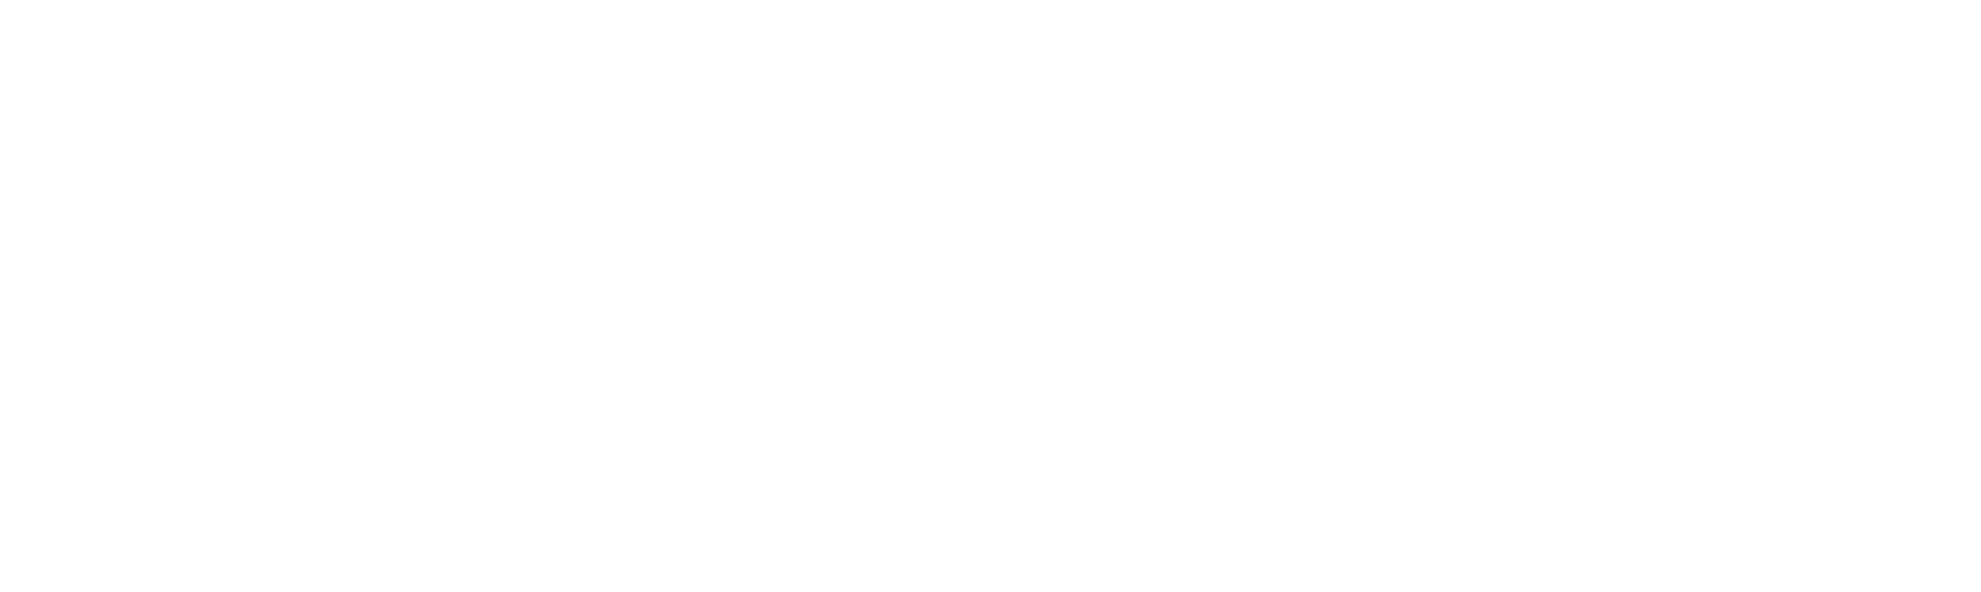 PLAYSTATION Avatar: Frontiers of Pandora - PS5